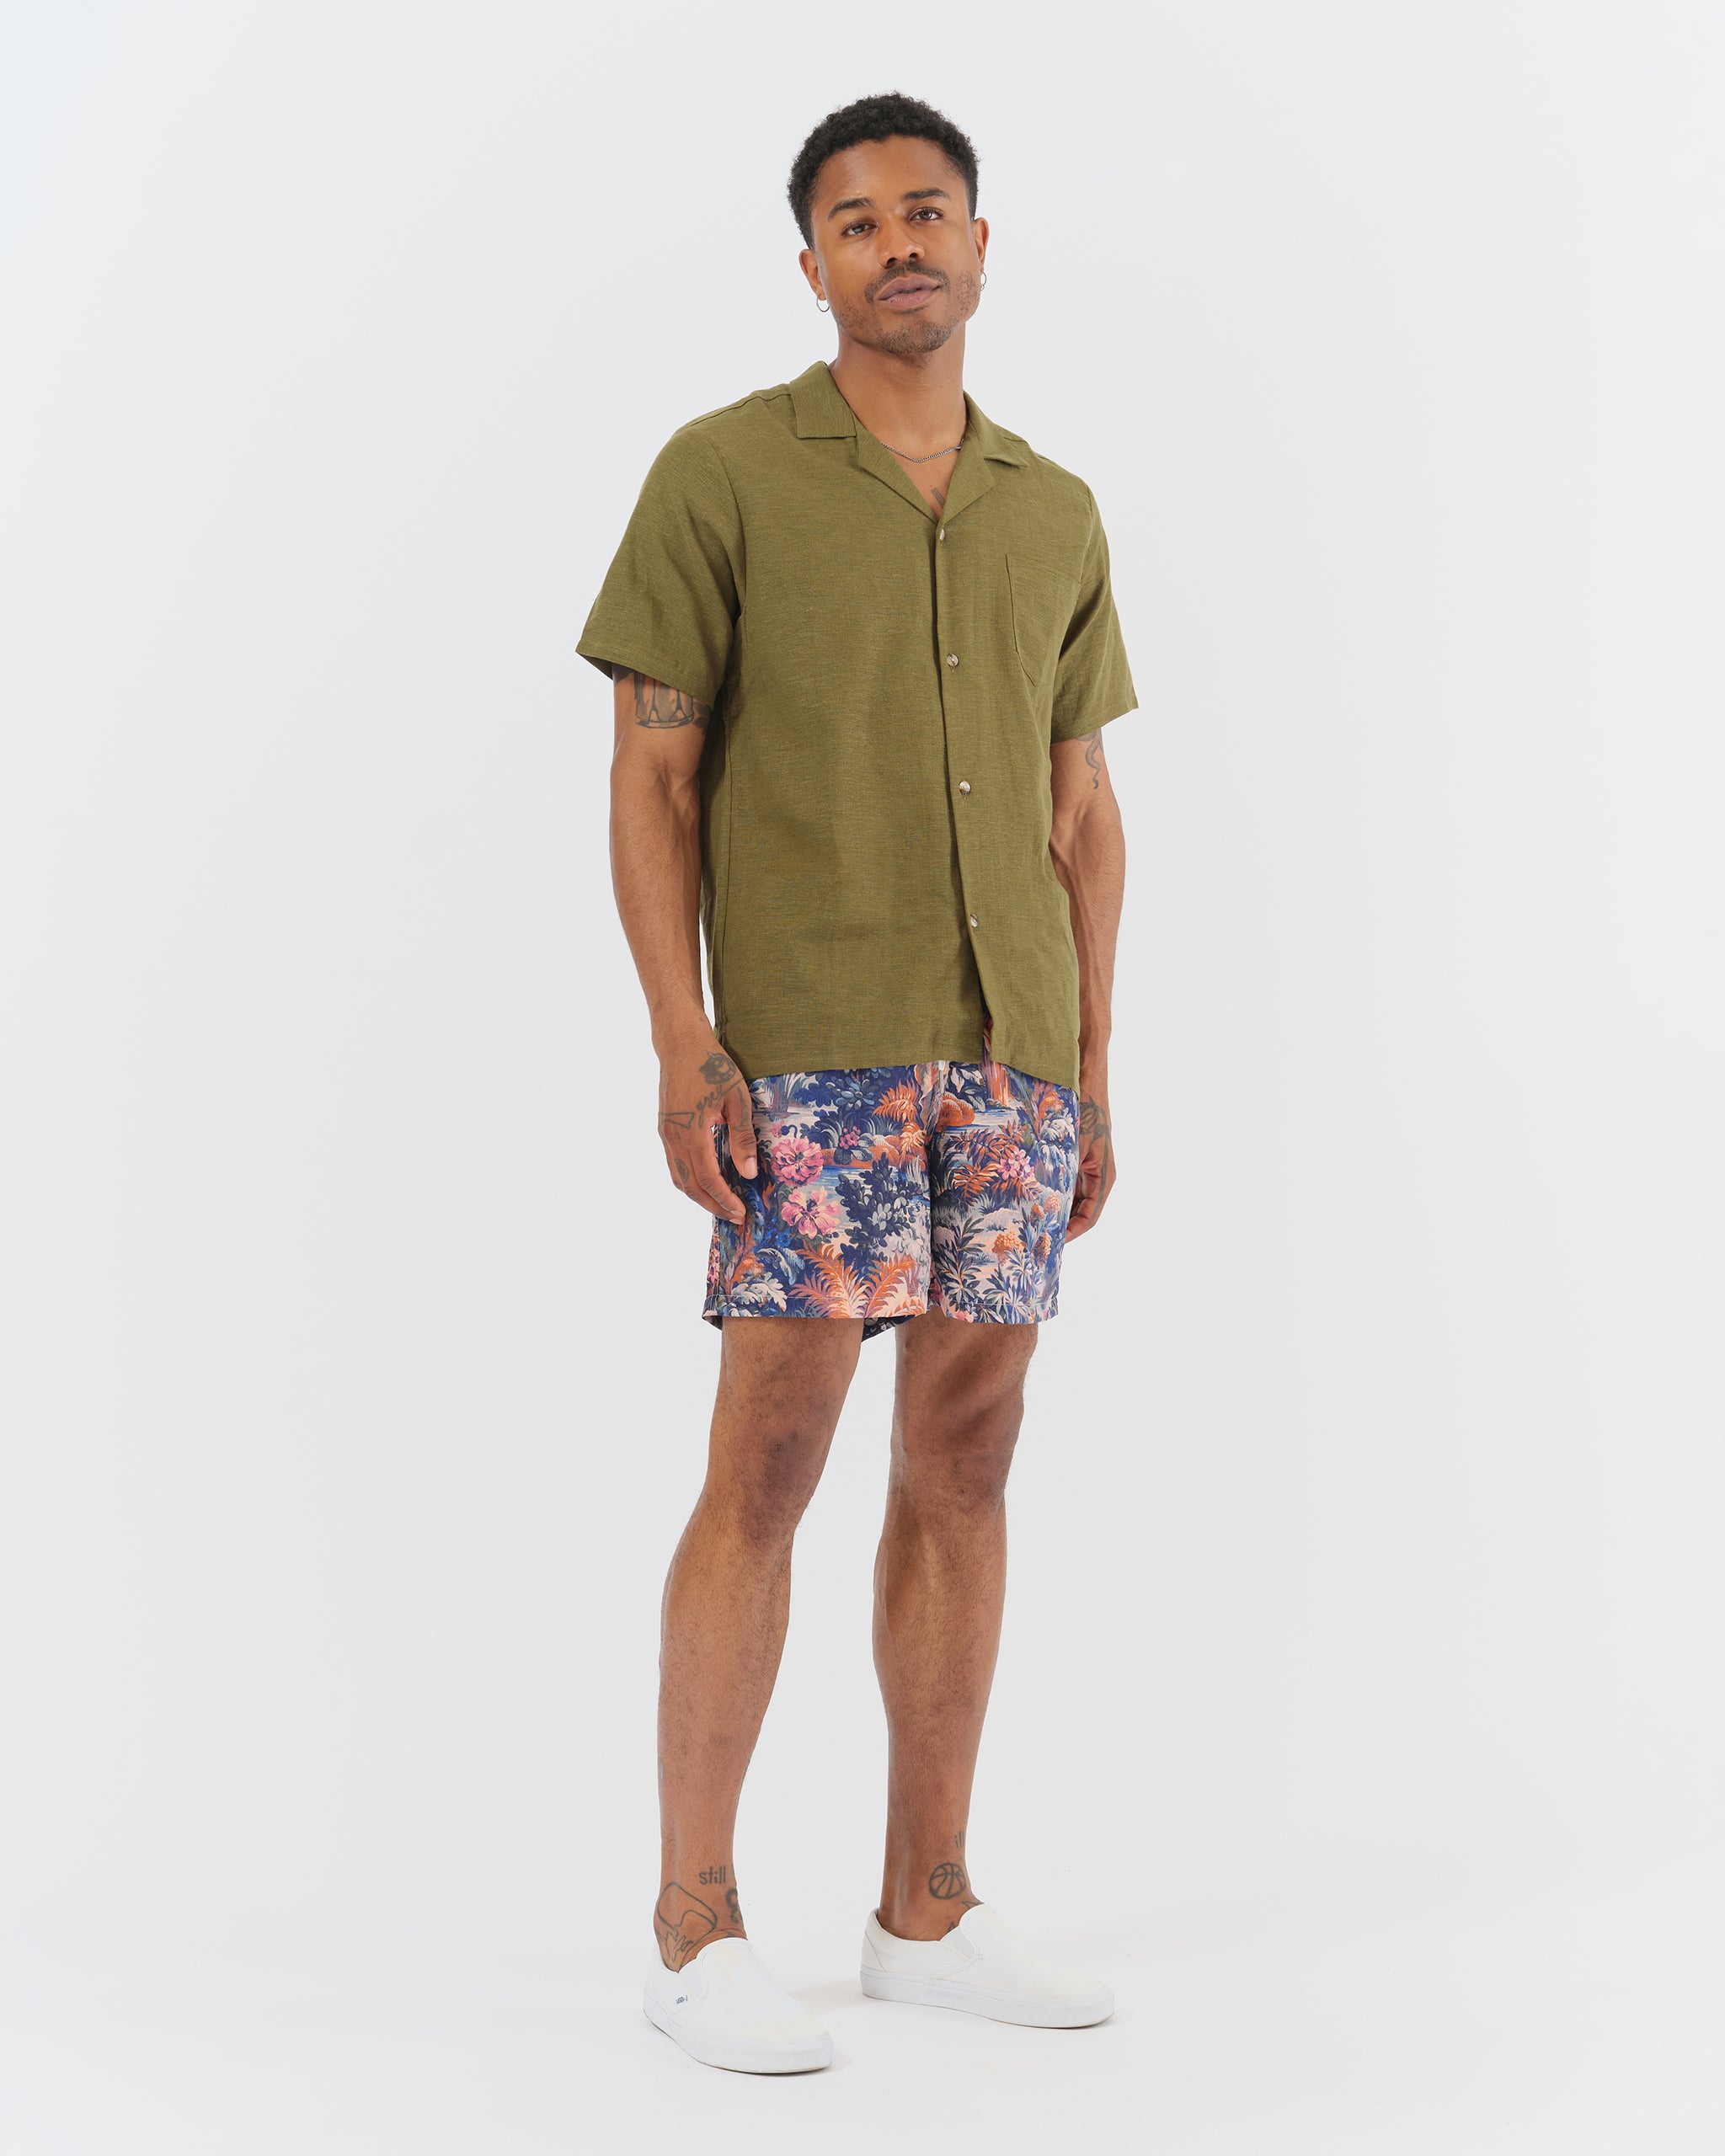 An olive green linen camp shirt with a chest pocket and two lower pockets on the front on model